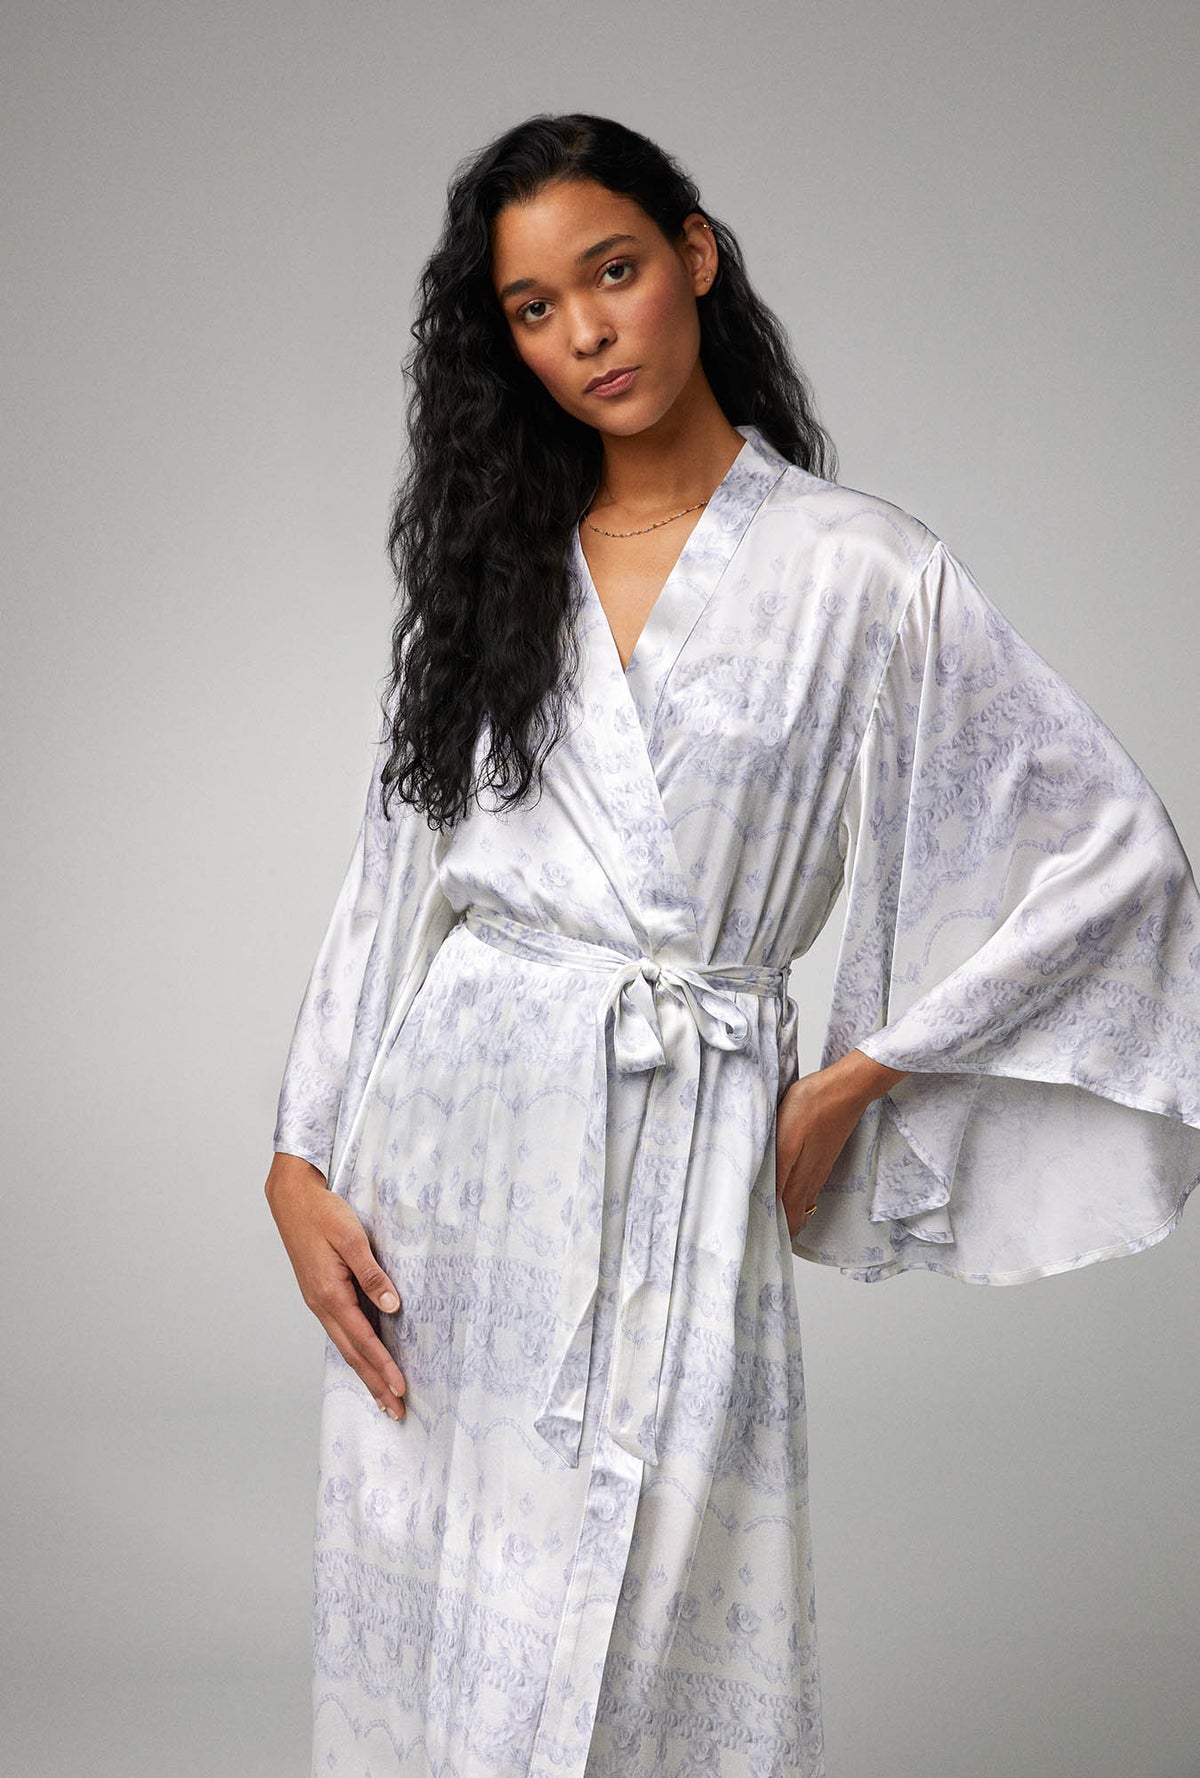 A lady Wearing Banded Collar Woven Silk Satin Maxi Robe with Buttercream print